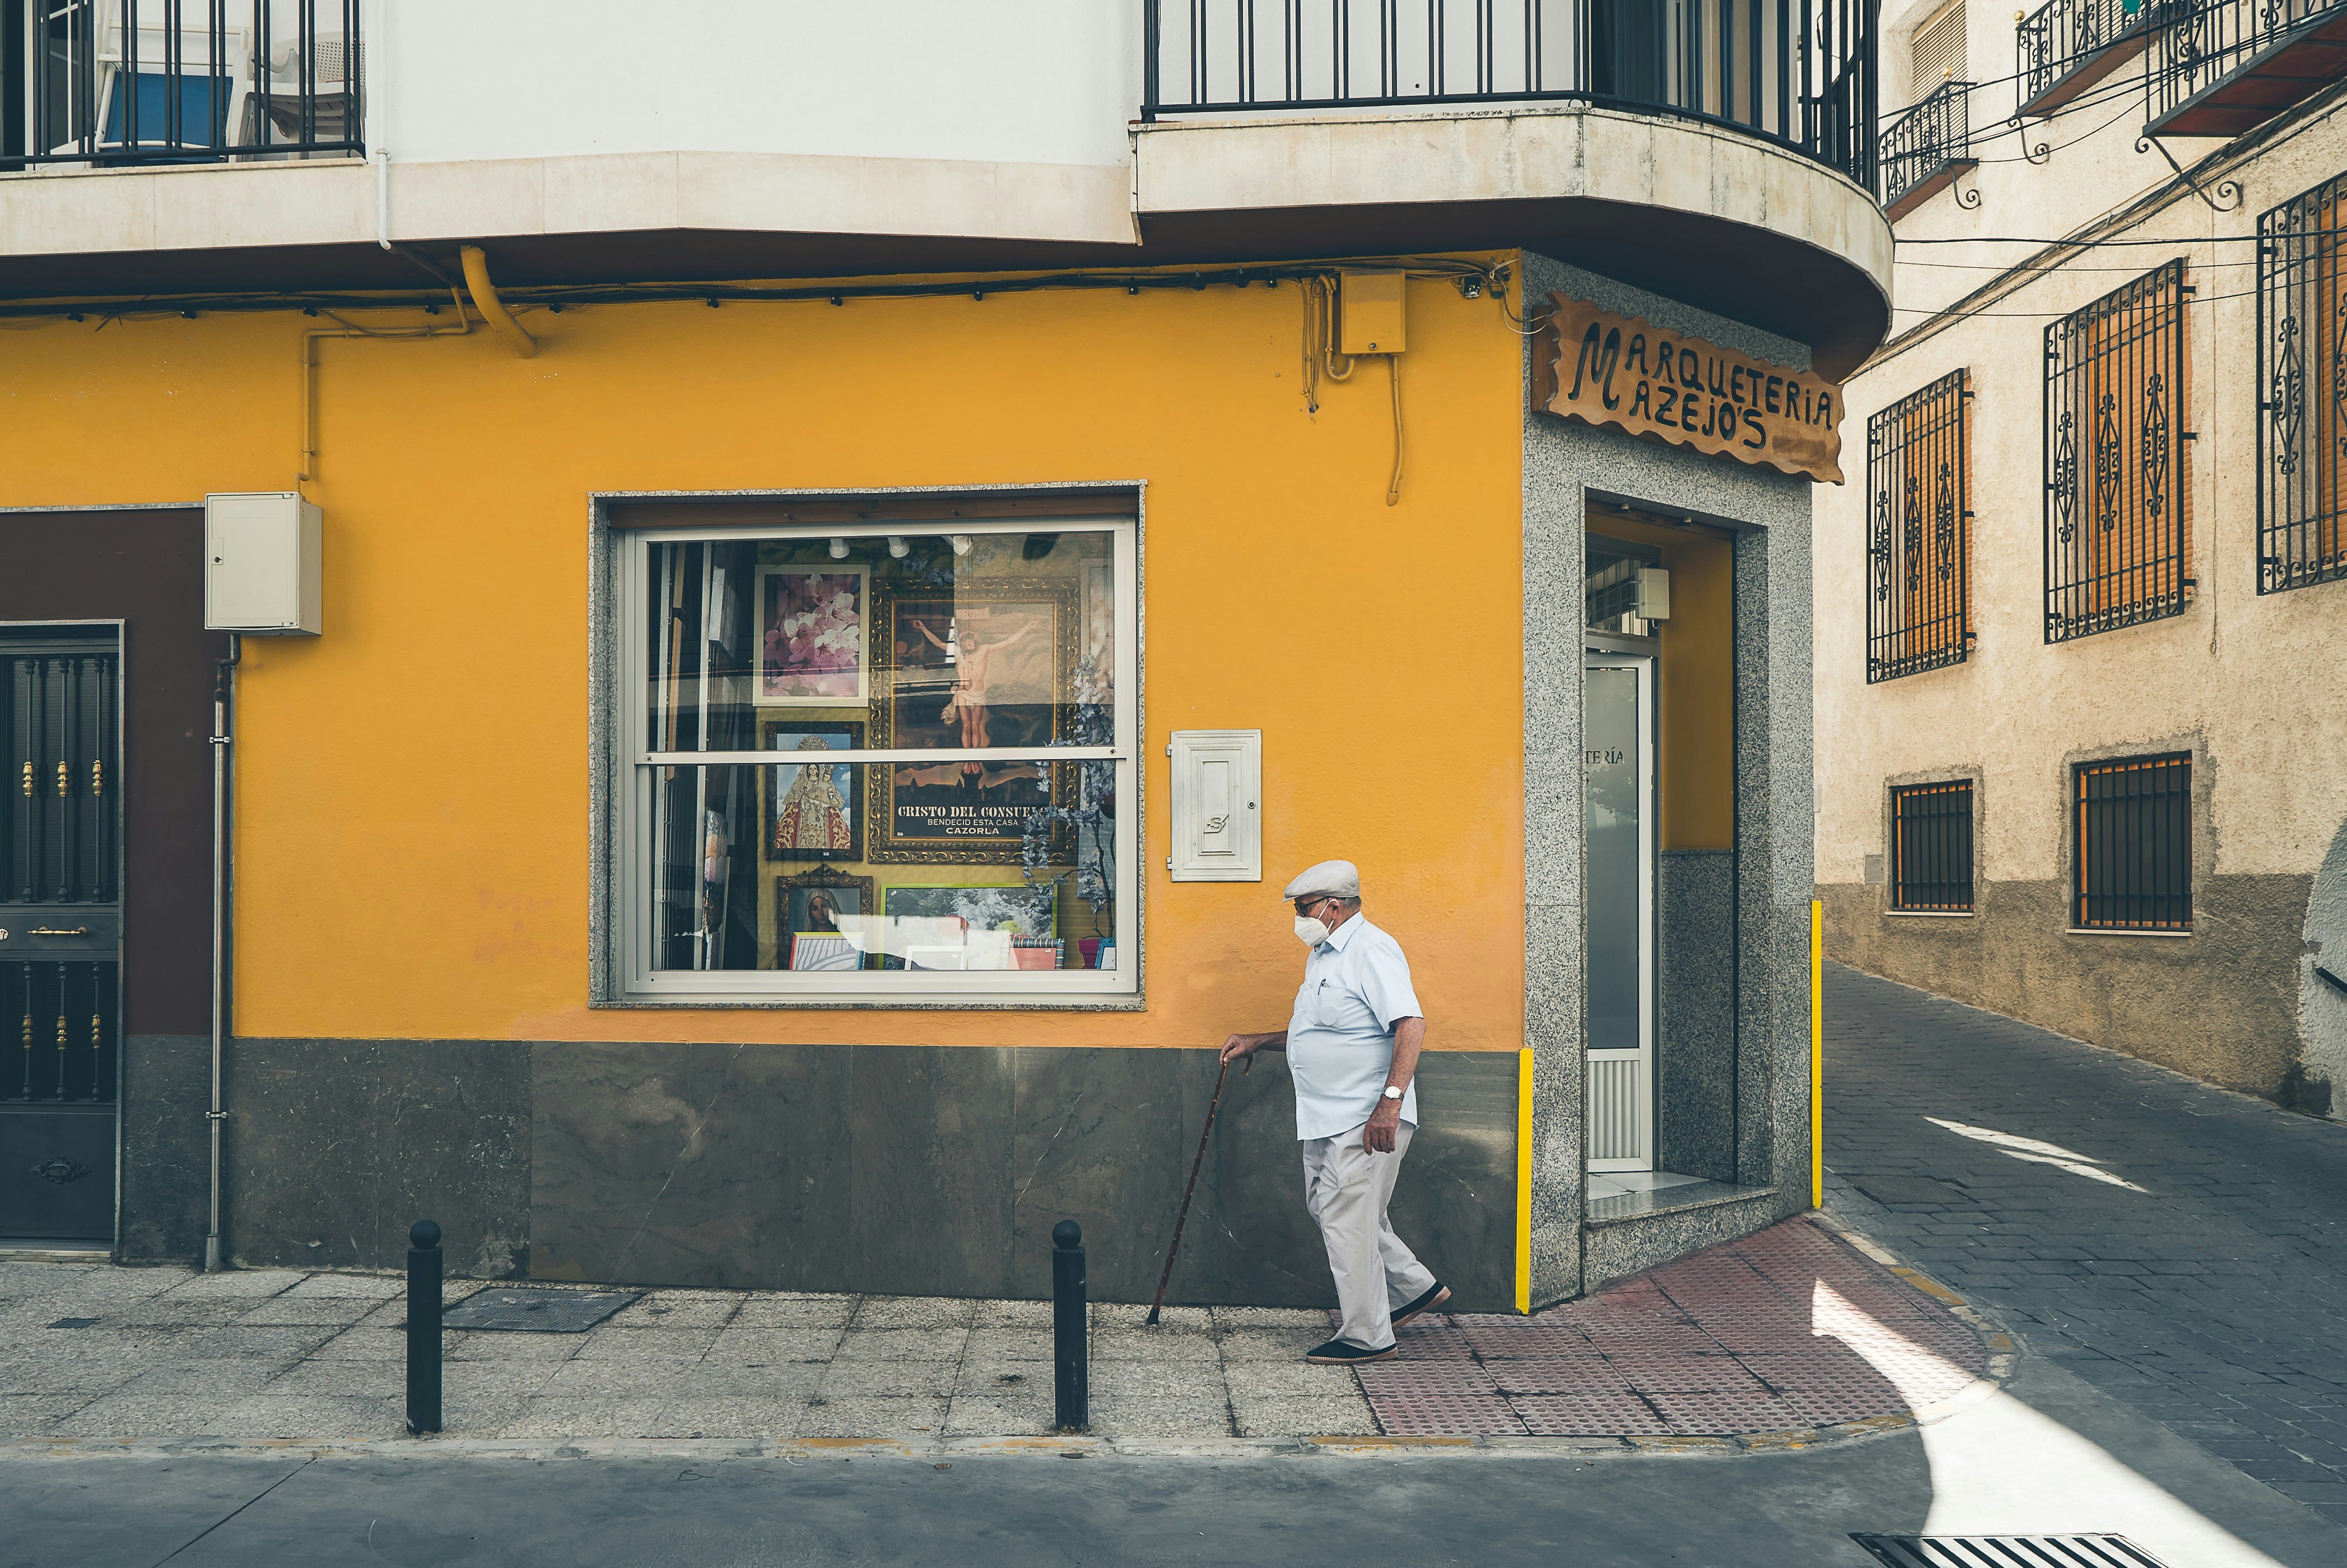 HOPE PASSING BY - Images of Christ on almost every street corner in Spain: will this bring true consolation in these challenging times? #corona-kindness #street-life